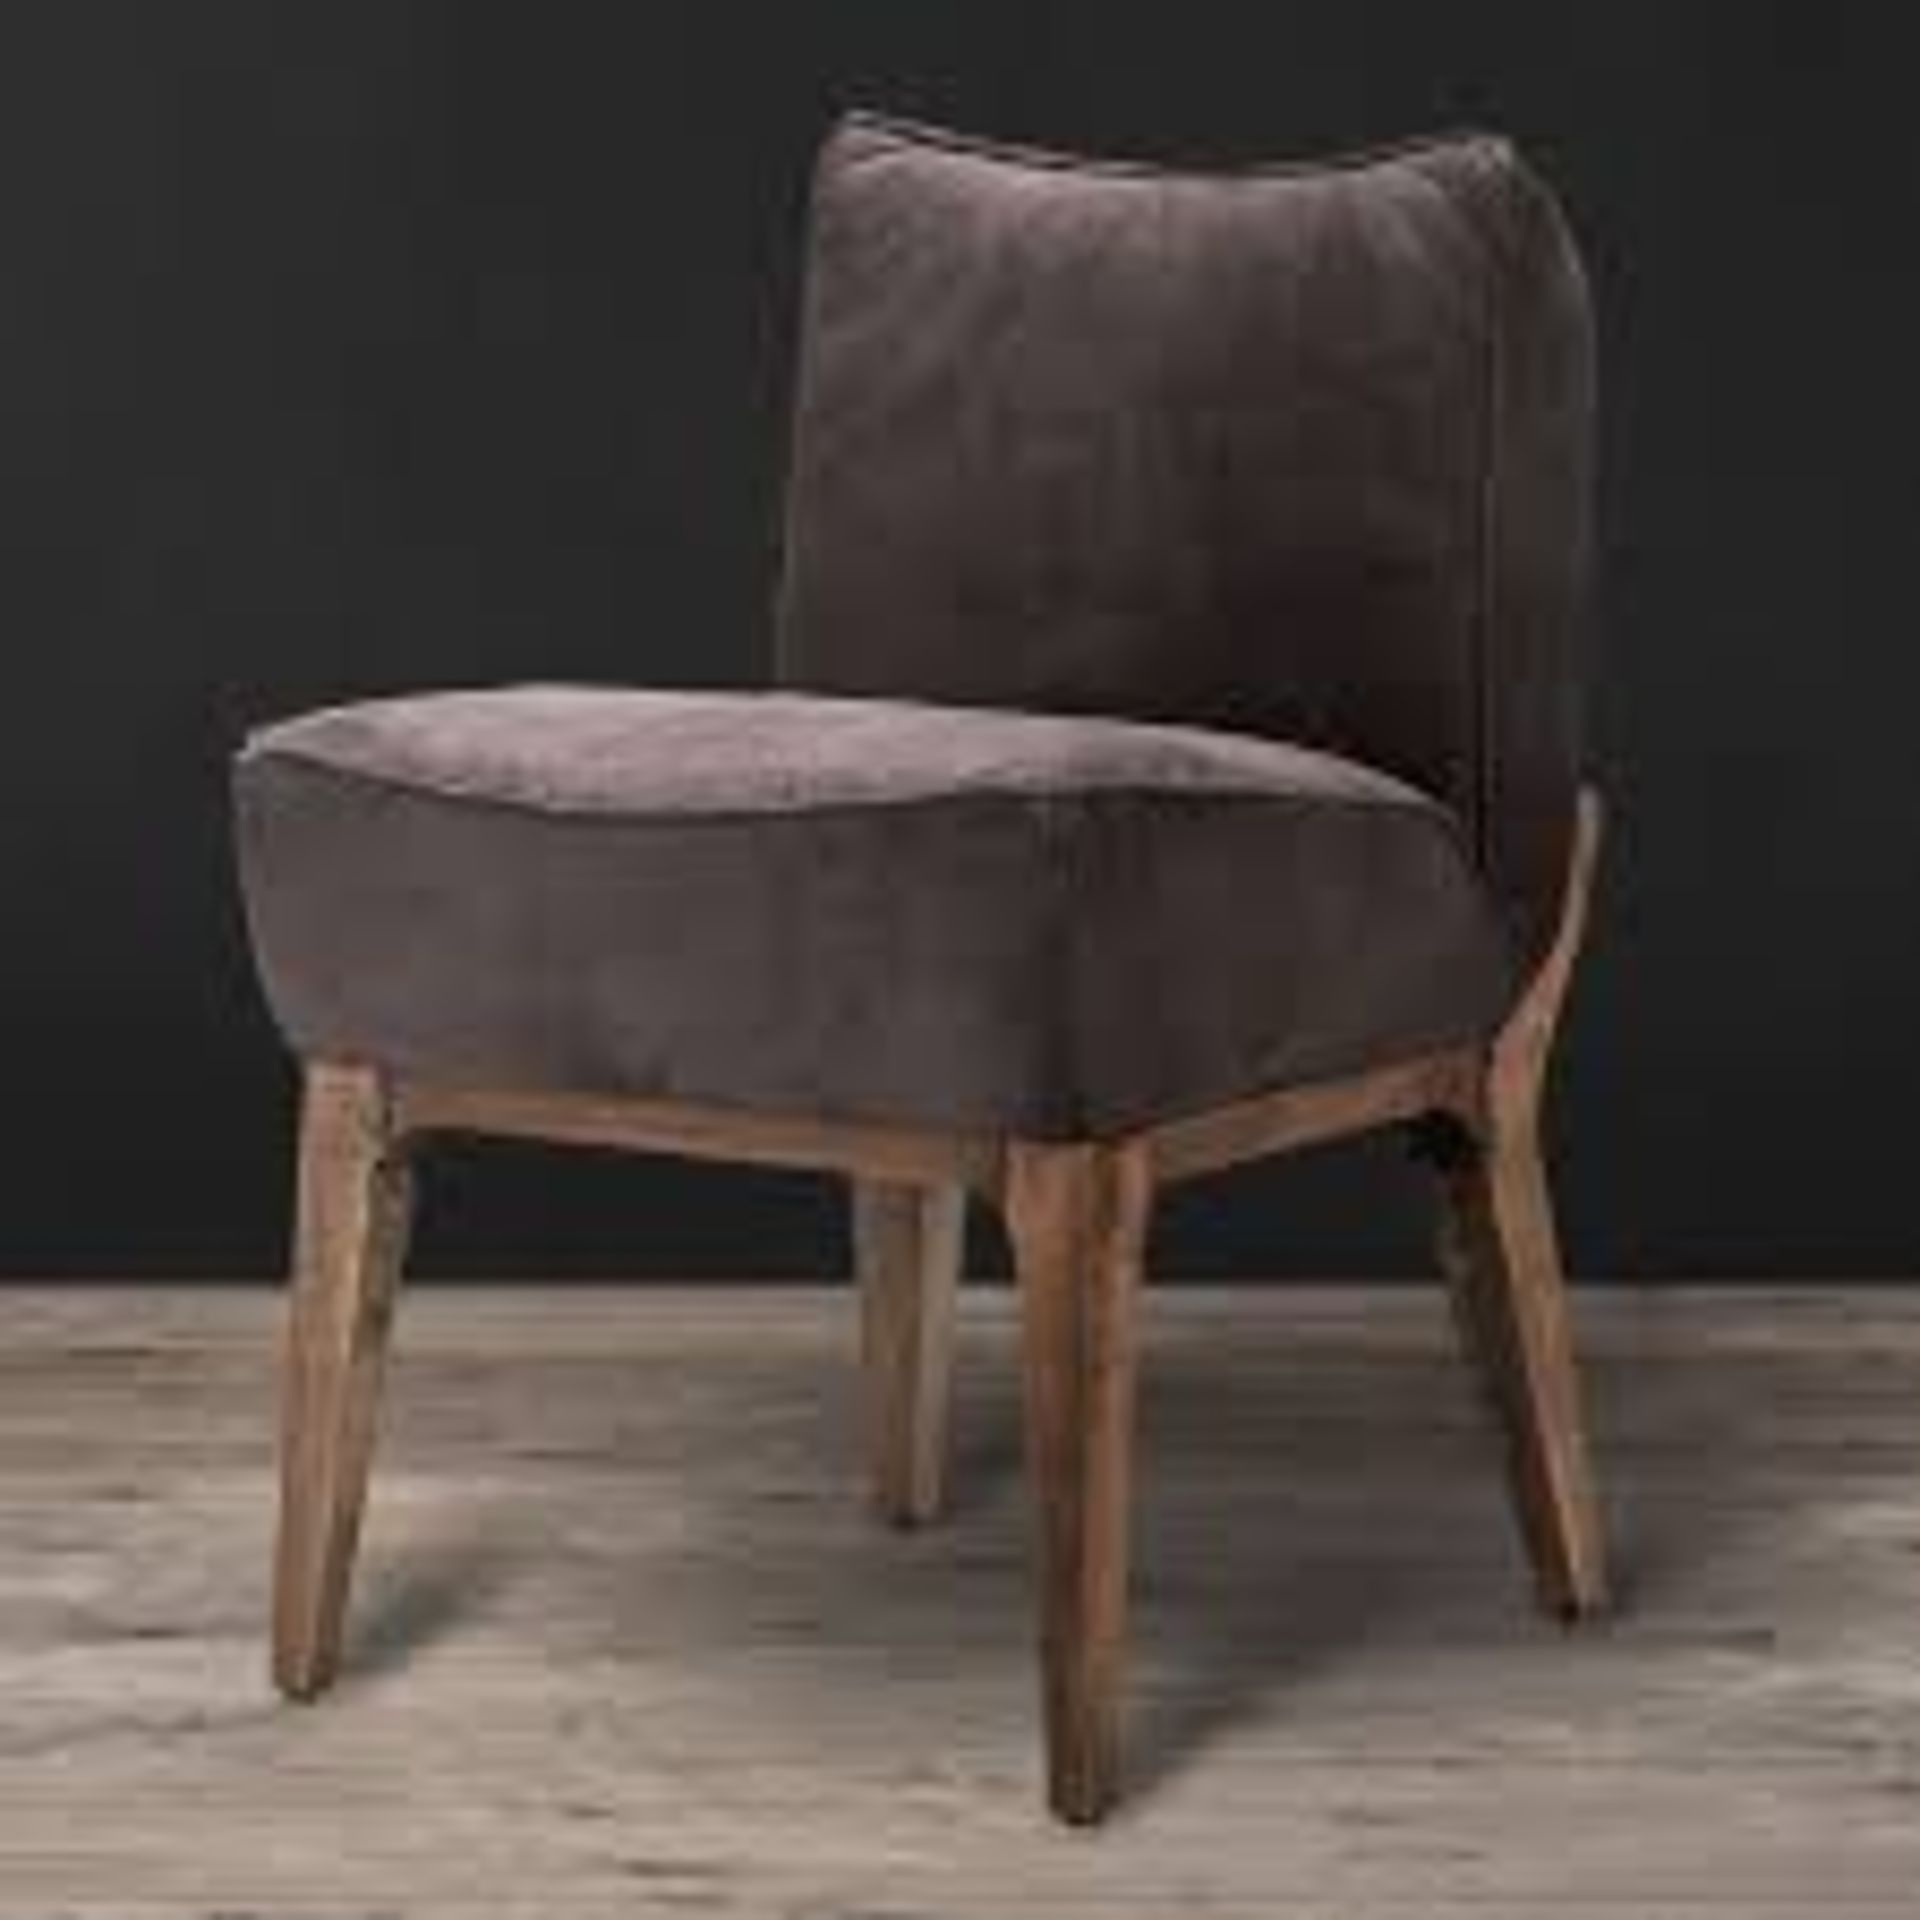 Creek Dining Chair Aussie Royal Grey Leather The Creek Dining Chair Is Deeply Cushioned For Hours At